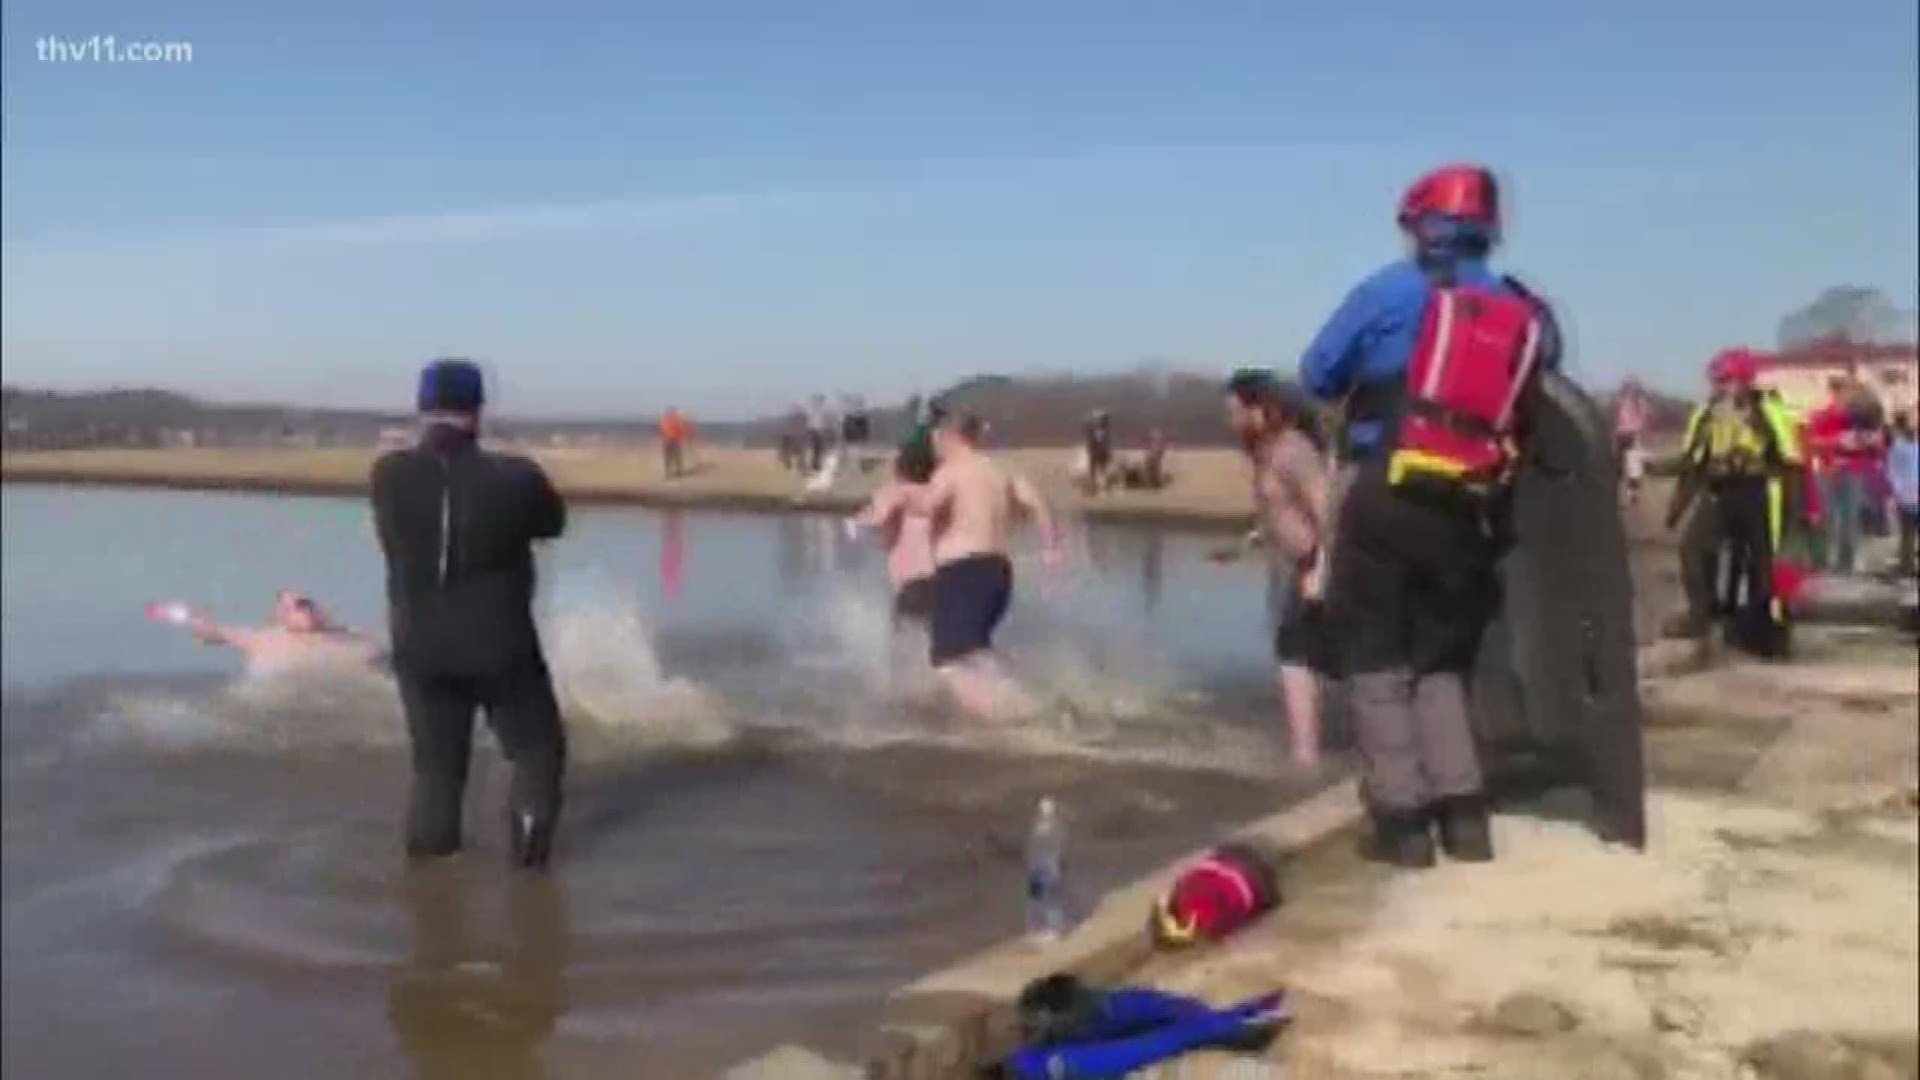 Dozens of people in Benton took the plunge today to raise money for Special Olympics Arkansas.